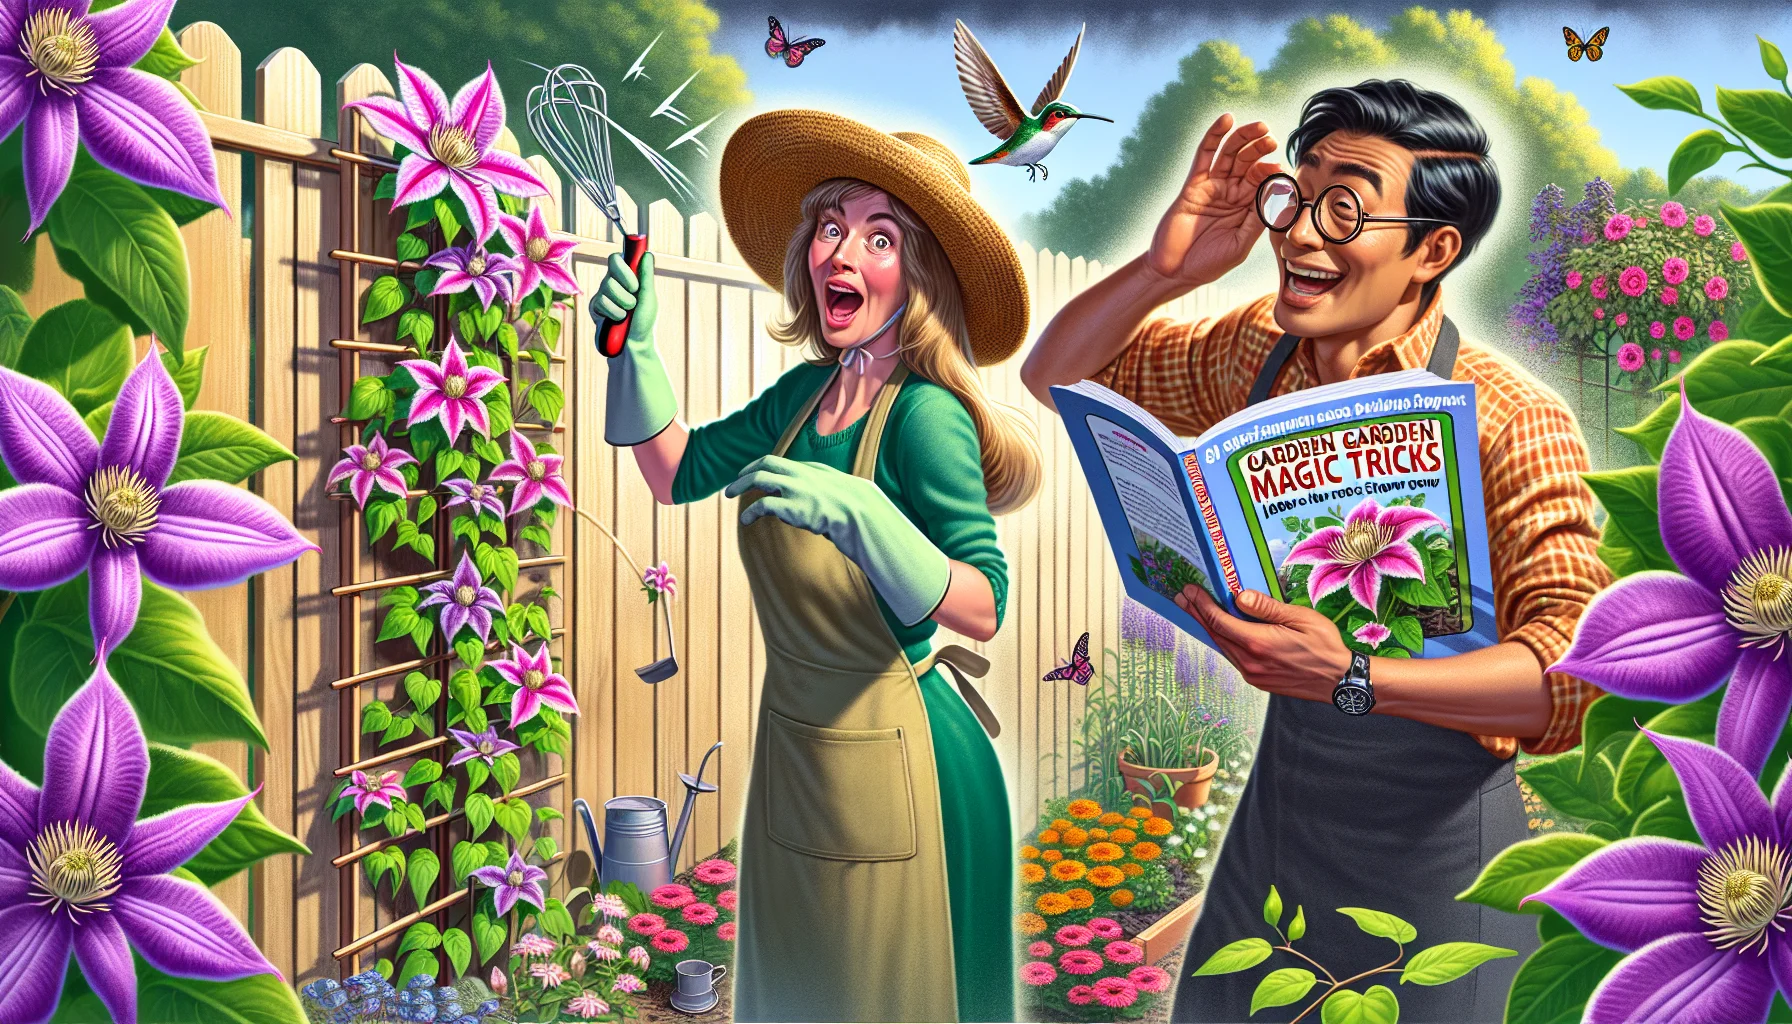 Imagine an amusing and enticing scenario depicting the bloom time of clematis flowers which encourages people to engage in gardening. A Caucasian woman with a green thumb, wearing gardening gloves and a sun hat, is surprised as a clematis vine on a trellis in her garden suddenly grows taller in fast motion. Nearby, a South Asian man chuckles while adjusting his glasses and holding a manual titled 'Garden Magic Tricks: Clematis Speed Growth' under his arm. The background is filled with various colorful flowers in full bloom, hummingbirds fluttering, and butterflies adding charm to the scene.